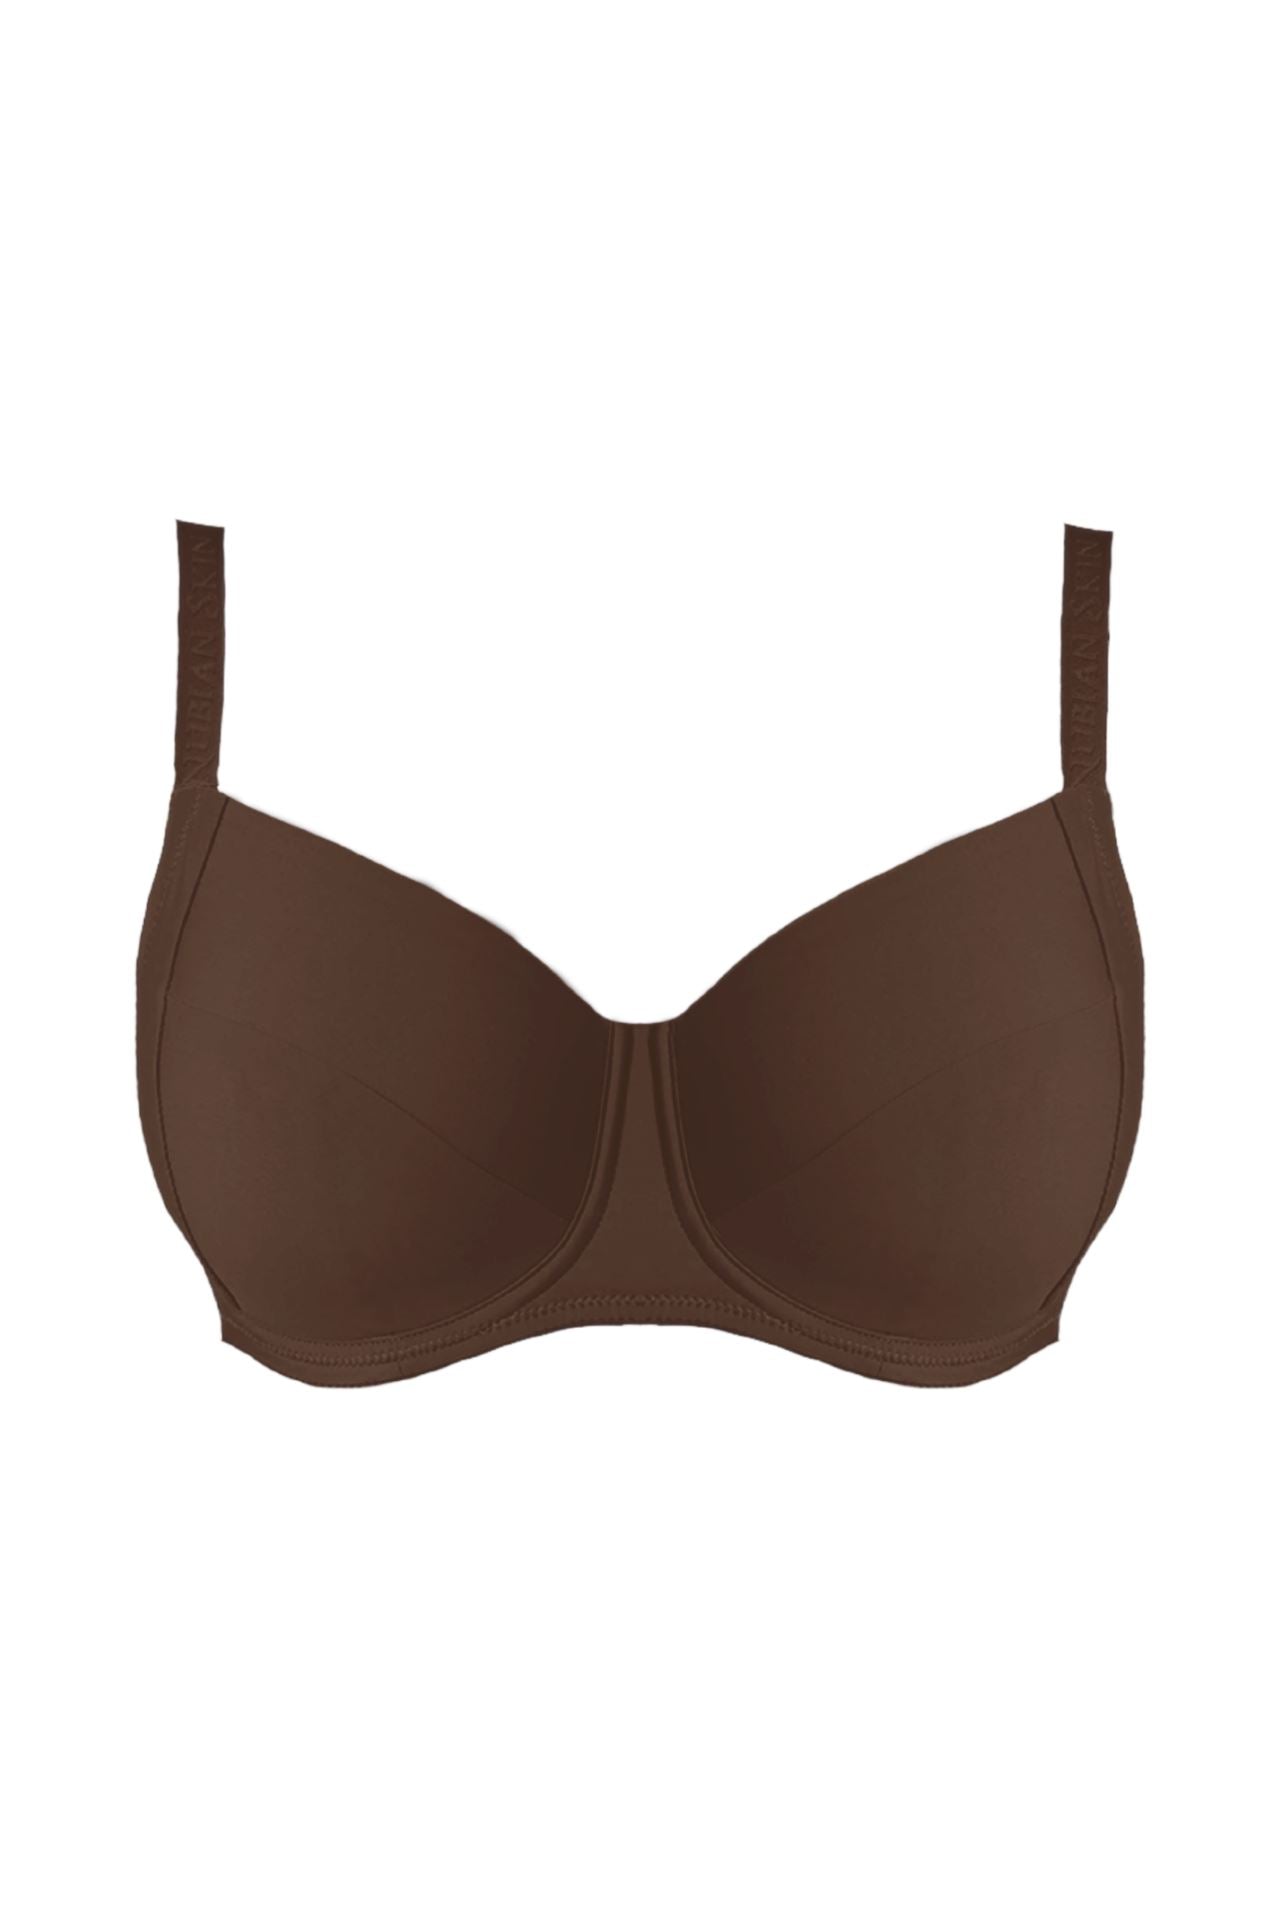 HSIA Strapless Bras for Women, Plus Size Minimizer Bra with Underwire  Lightly Lined Convertible Bandeau Bra for Big Large Busted, Brown 34C at   Women's Clothing store